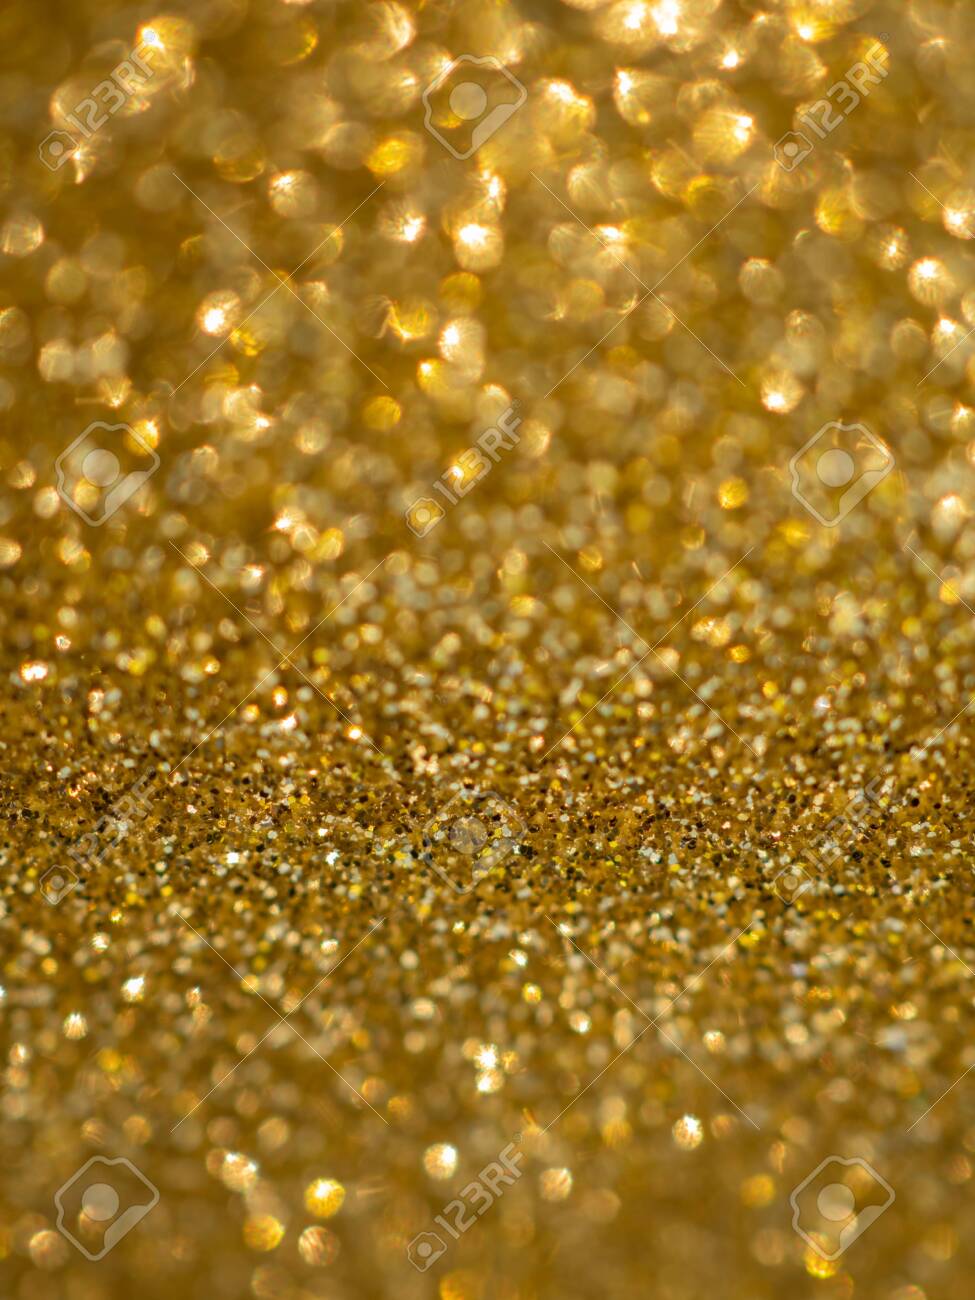 Sparkle Wallpaper For Christmas A Glittery Gold Paper Golden